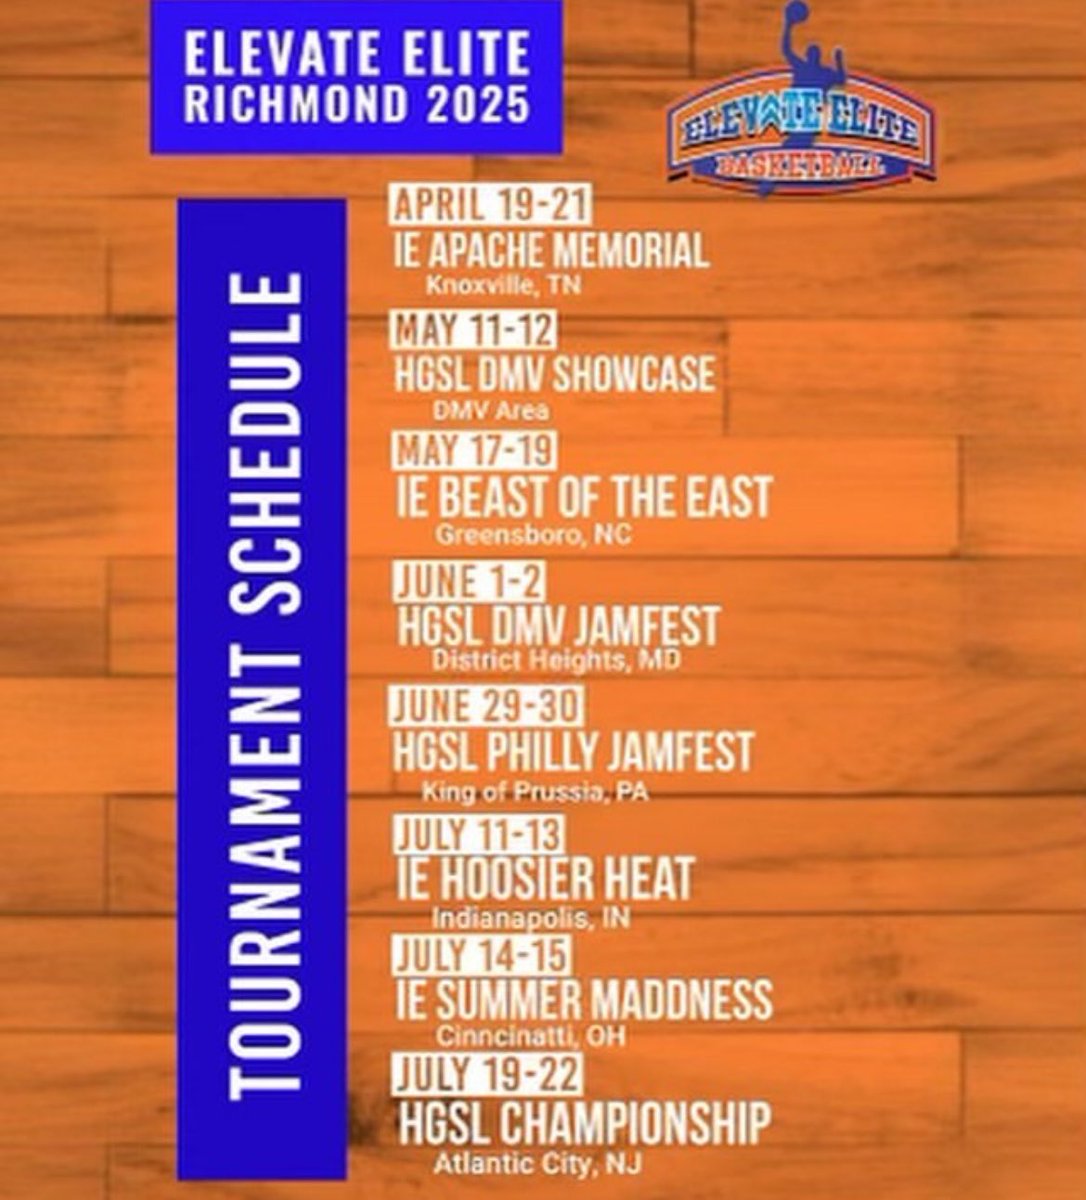 one last ride , here is my aau schedule for this year. let’s goooo